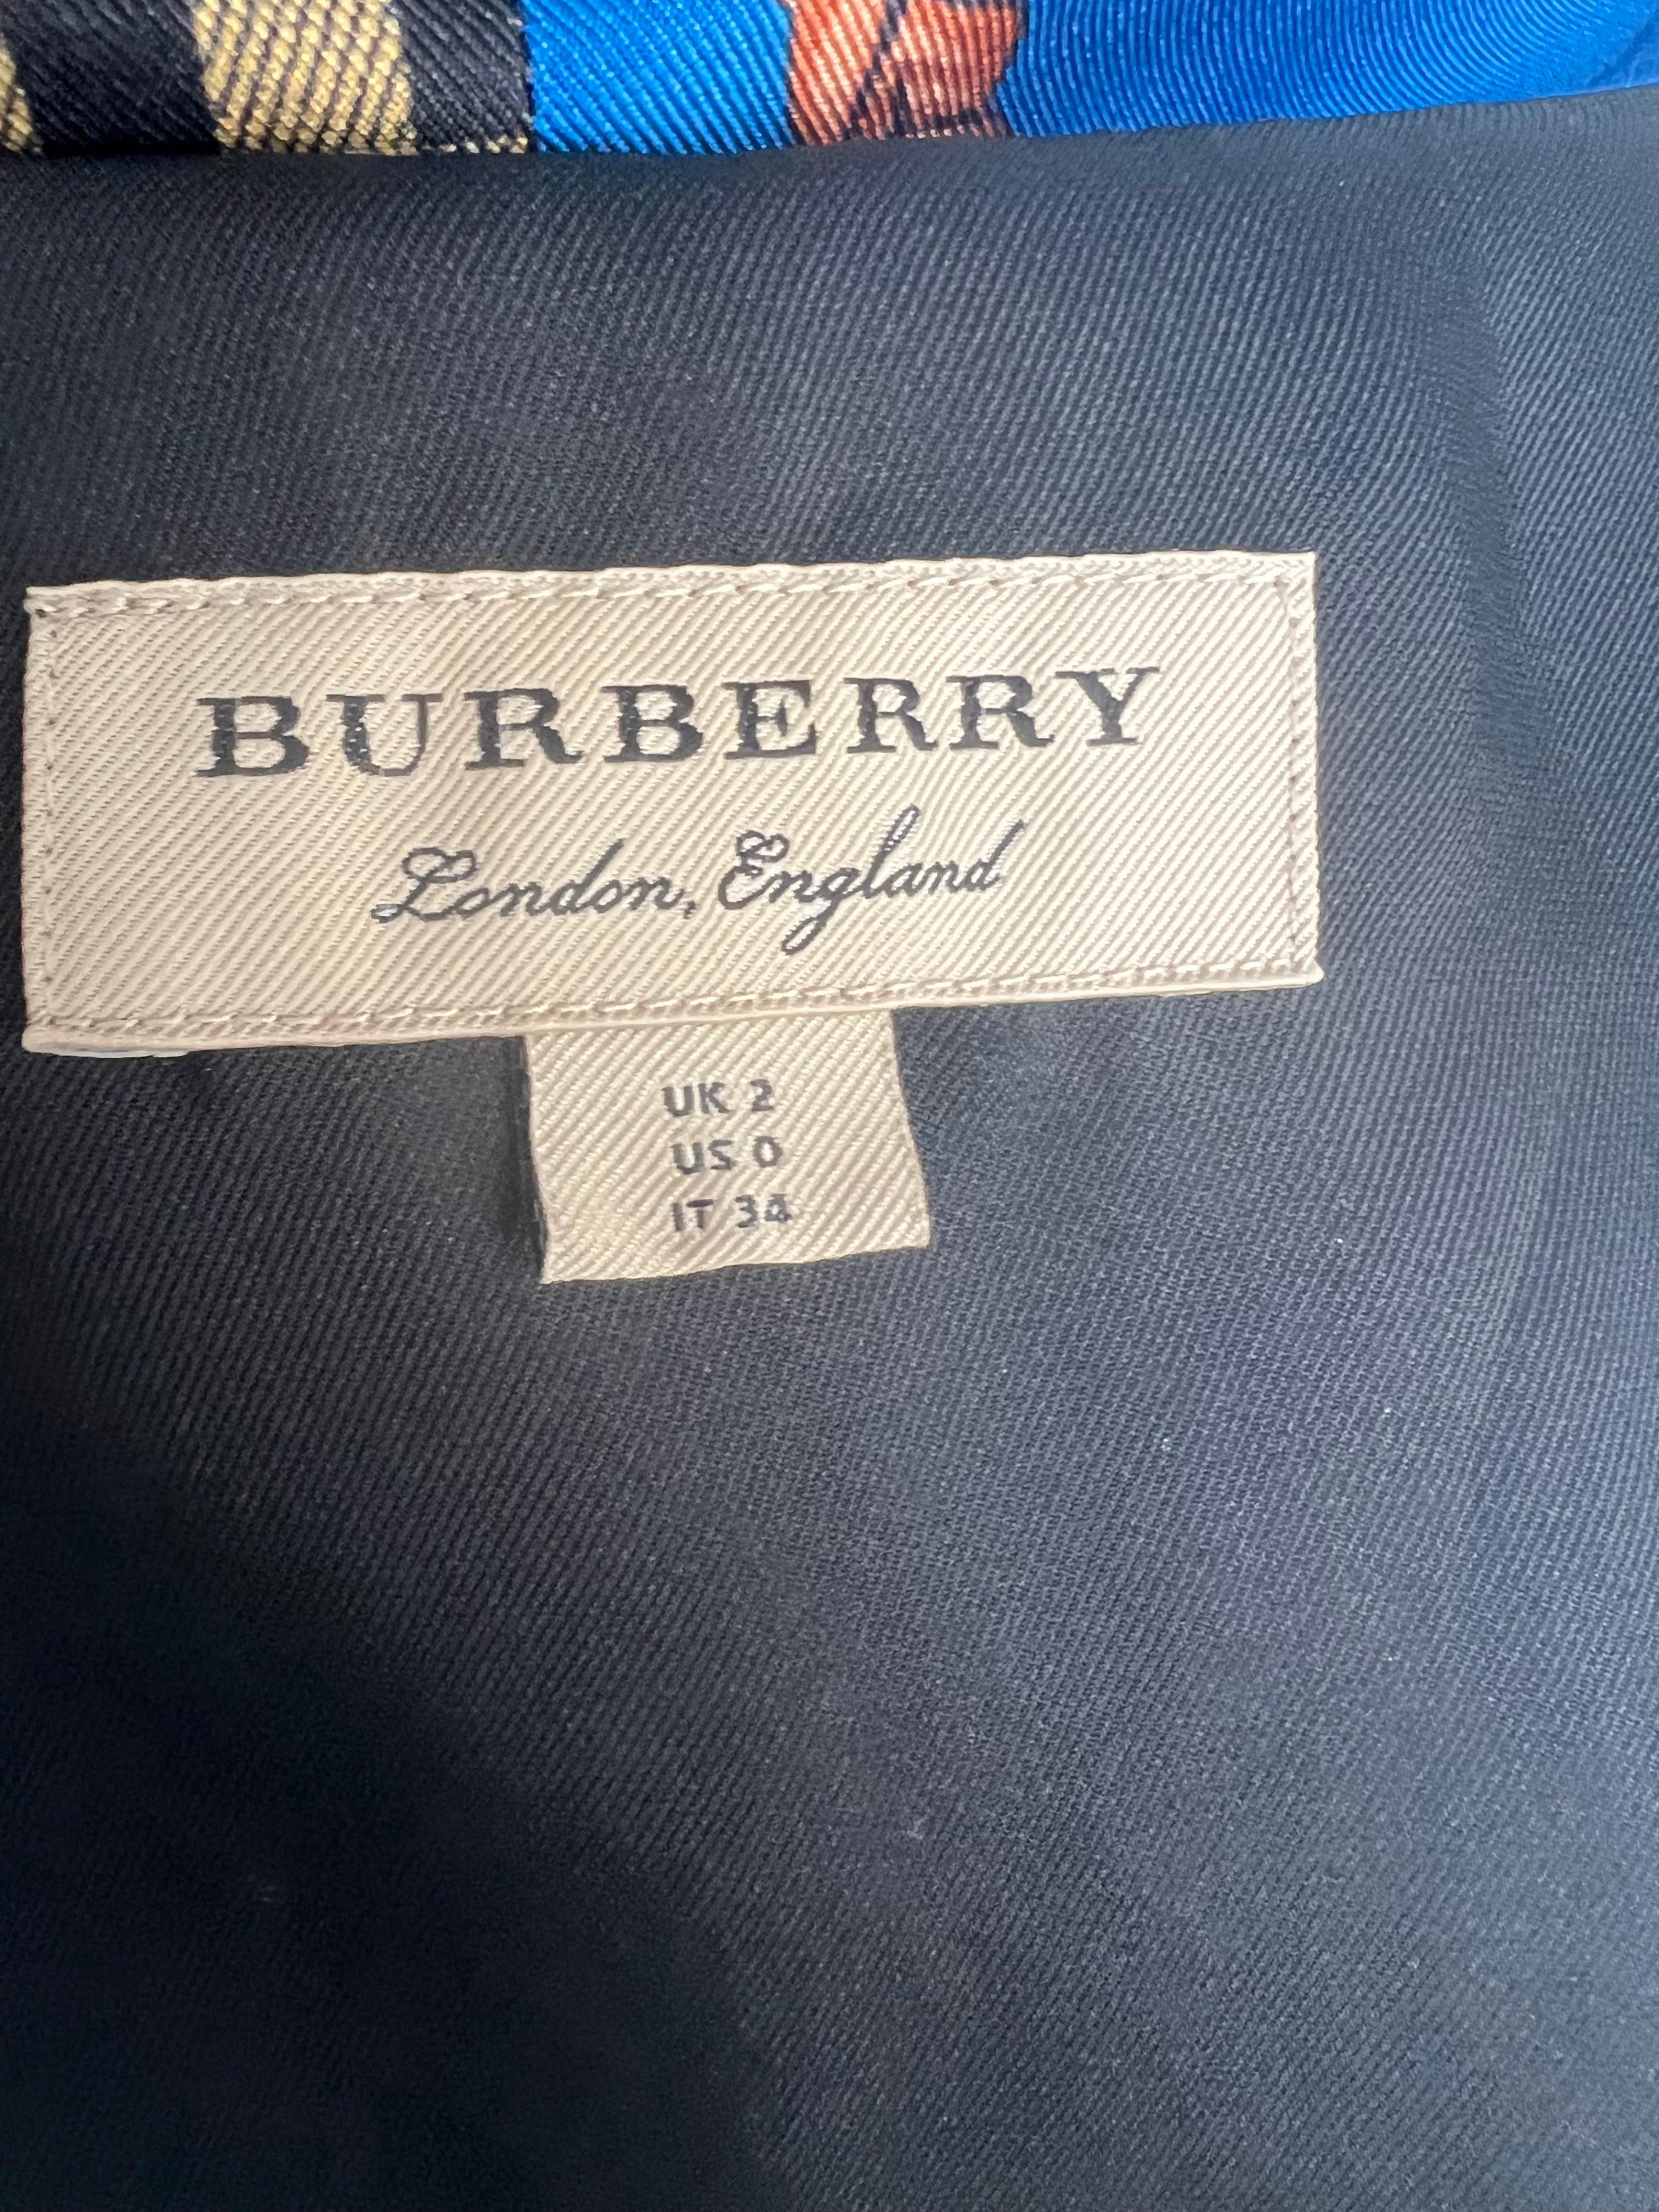 Burberry London England Vintage Inspired Silk shirt  size 0 For Sale 1